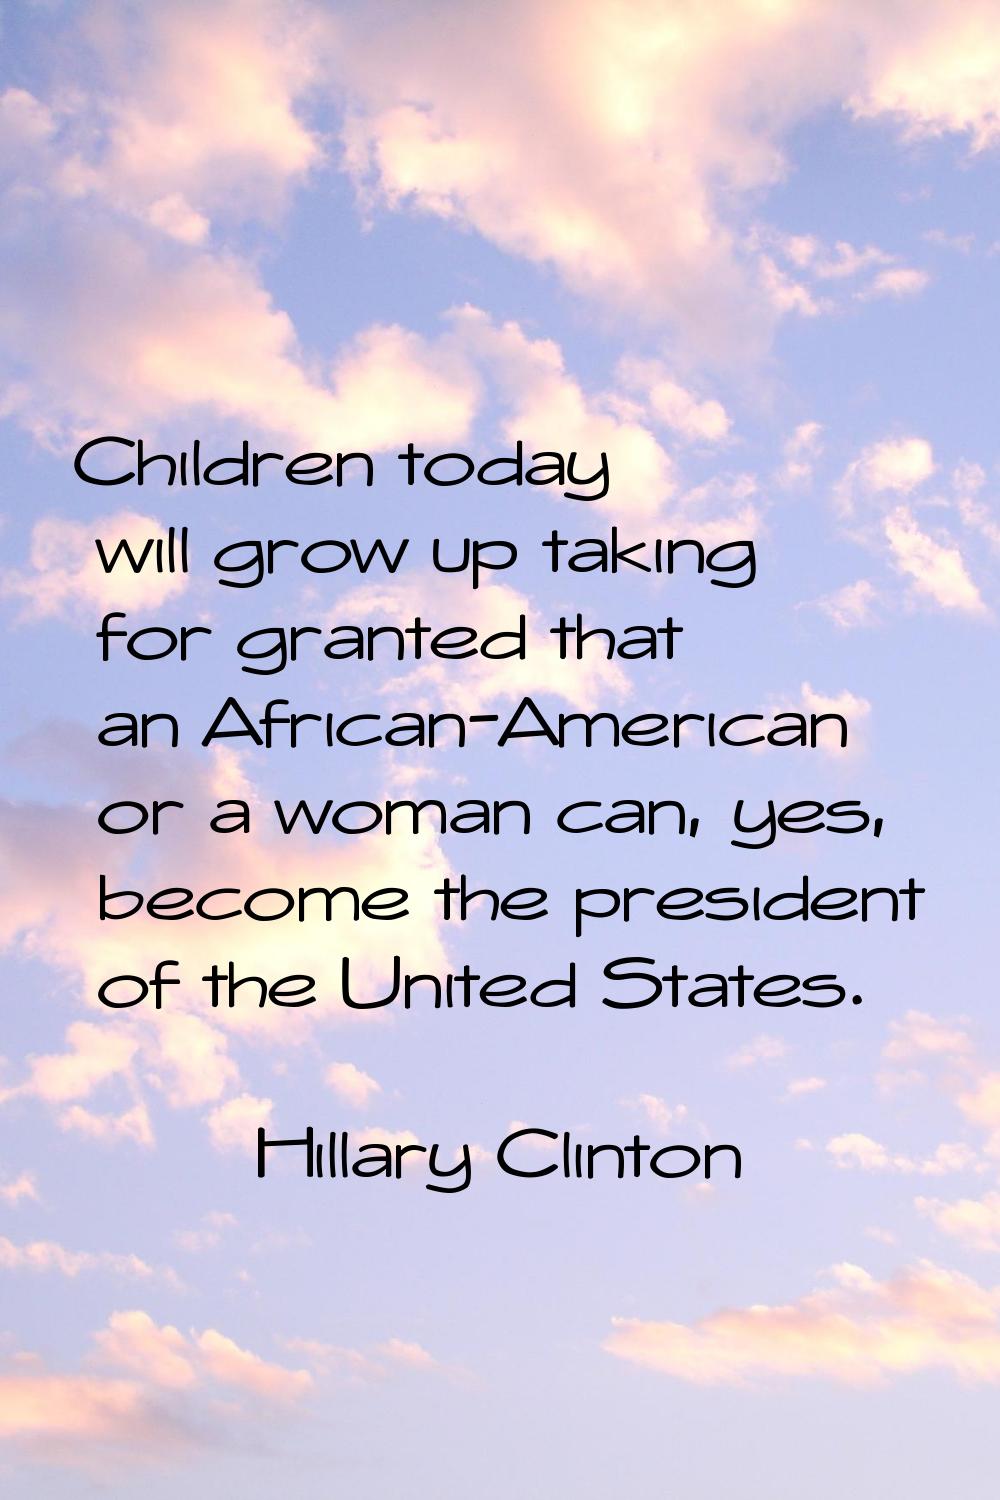 Children today will grow up taking for granted that an African-American or a woman can, yes, become